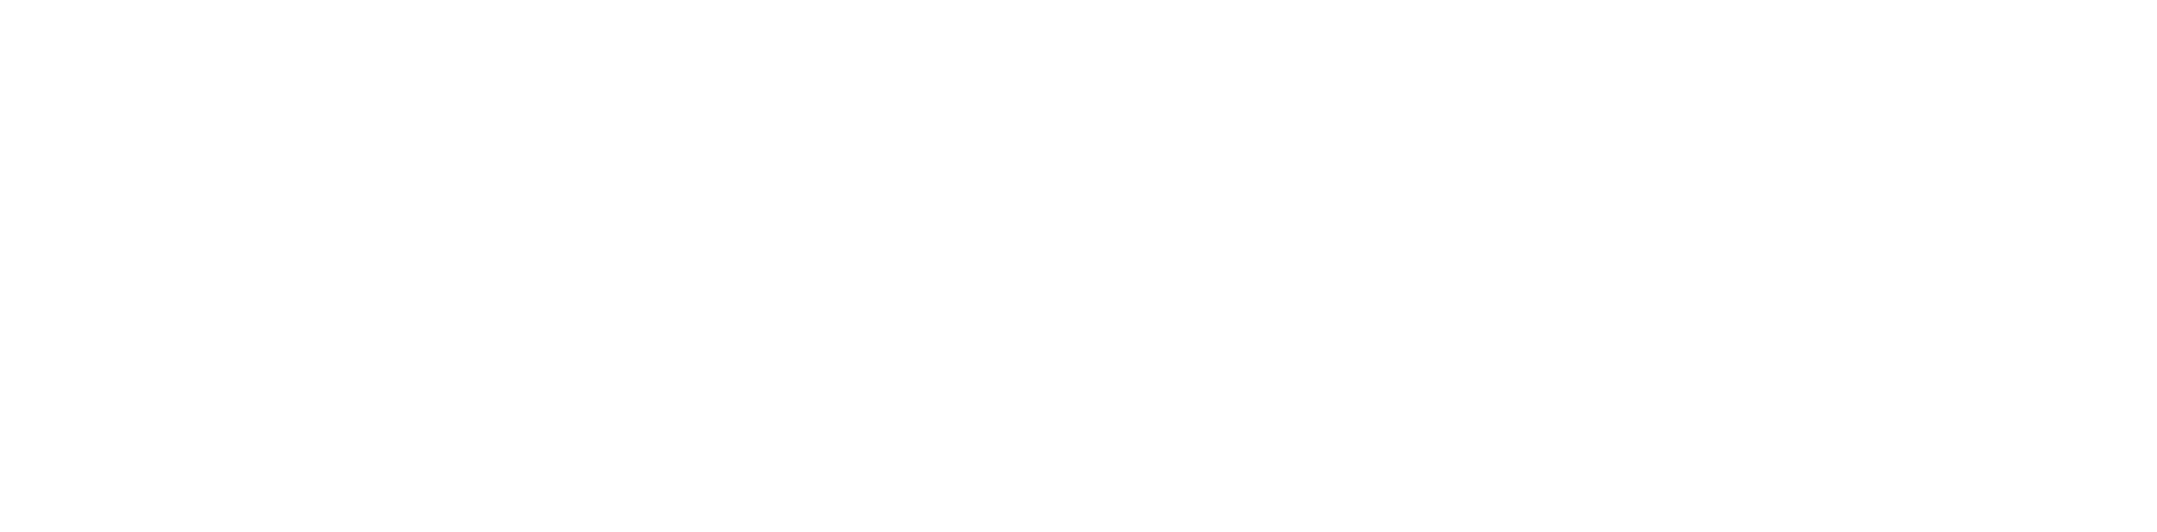 Cleverciti_Logo_white (1).png